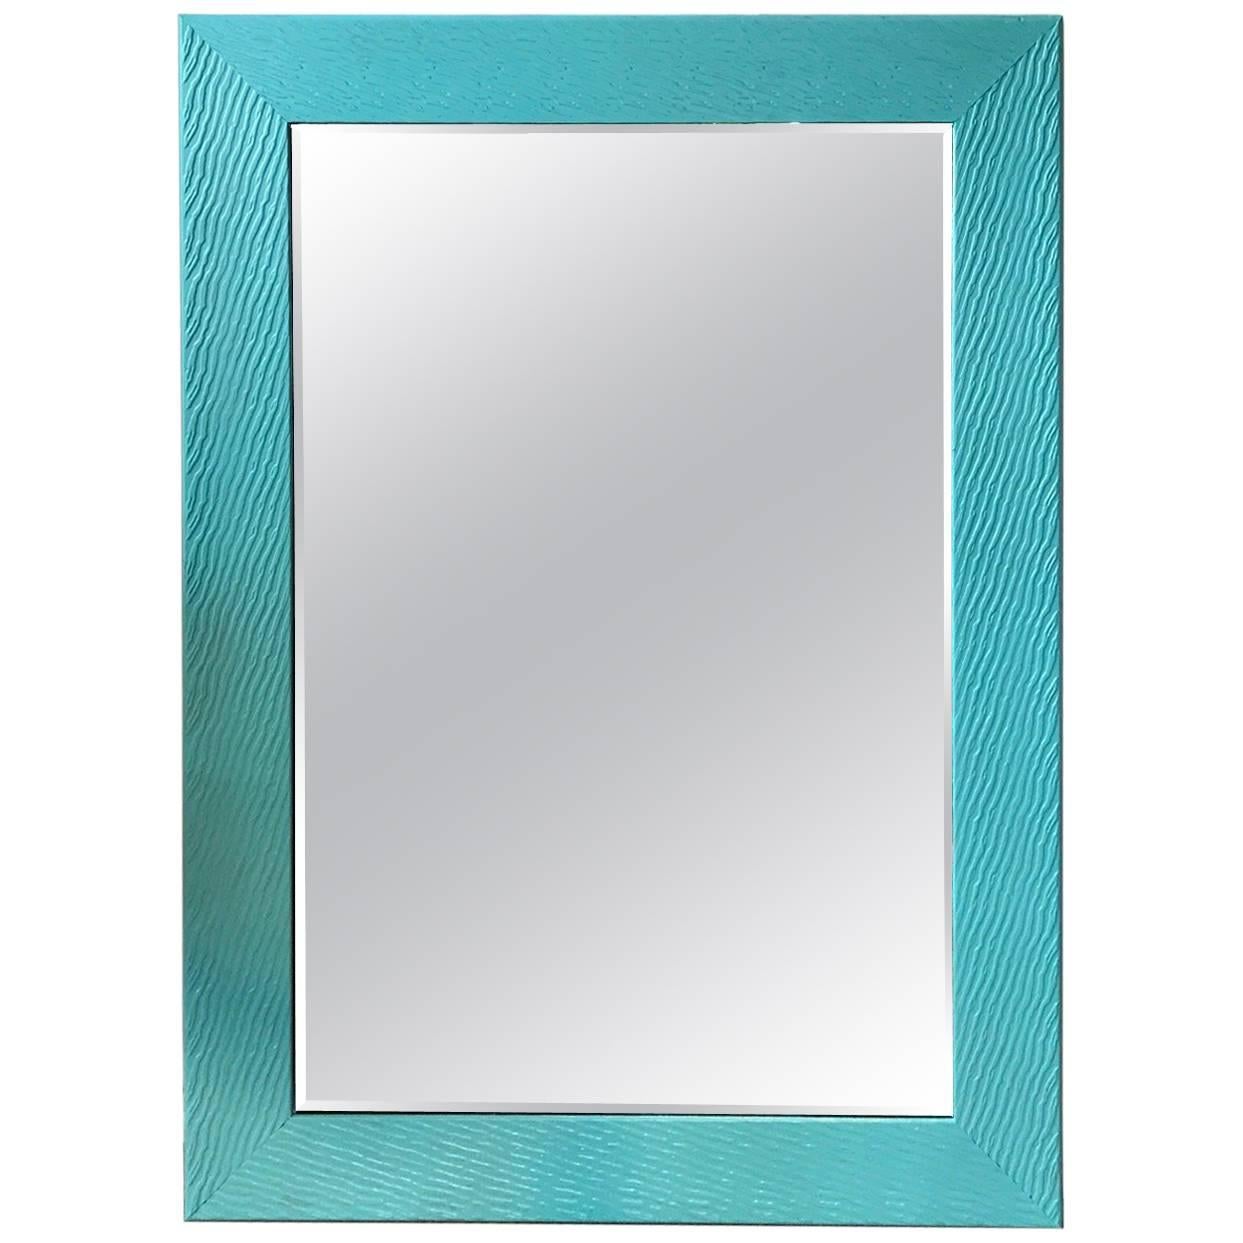 ON SALE NOW! Beach Blues Hand Painted Modern Mirror  For Sale